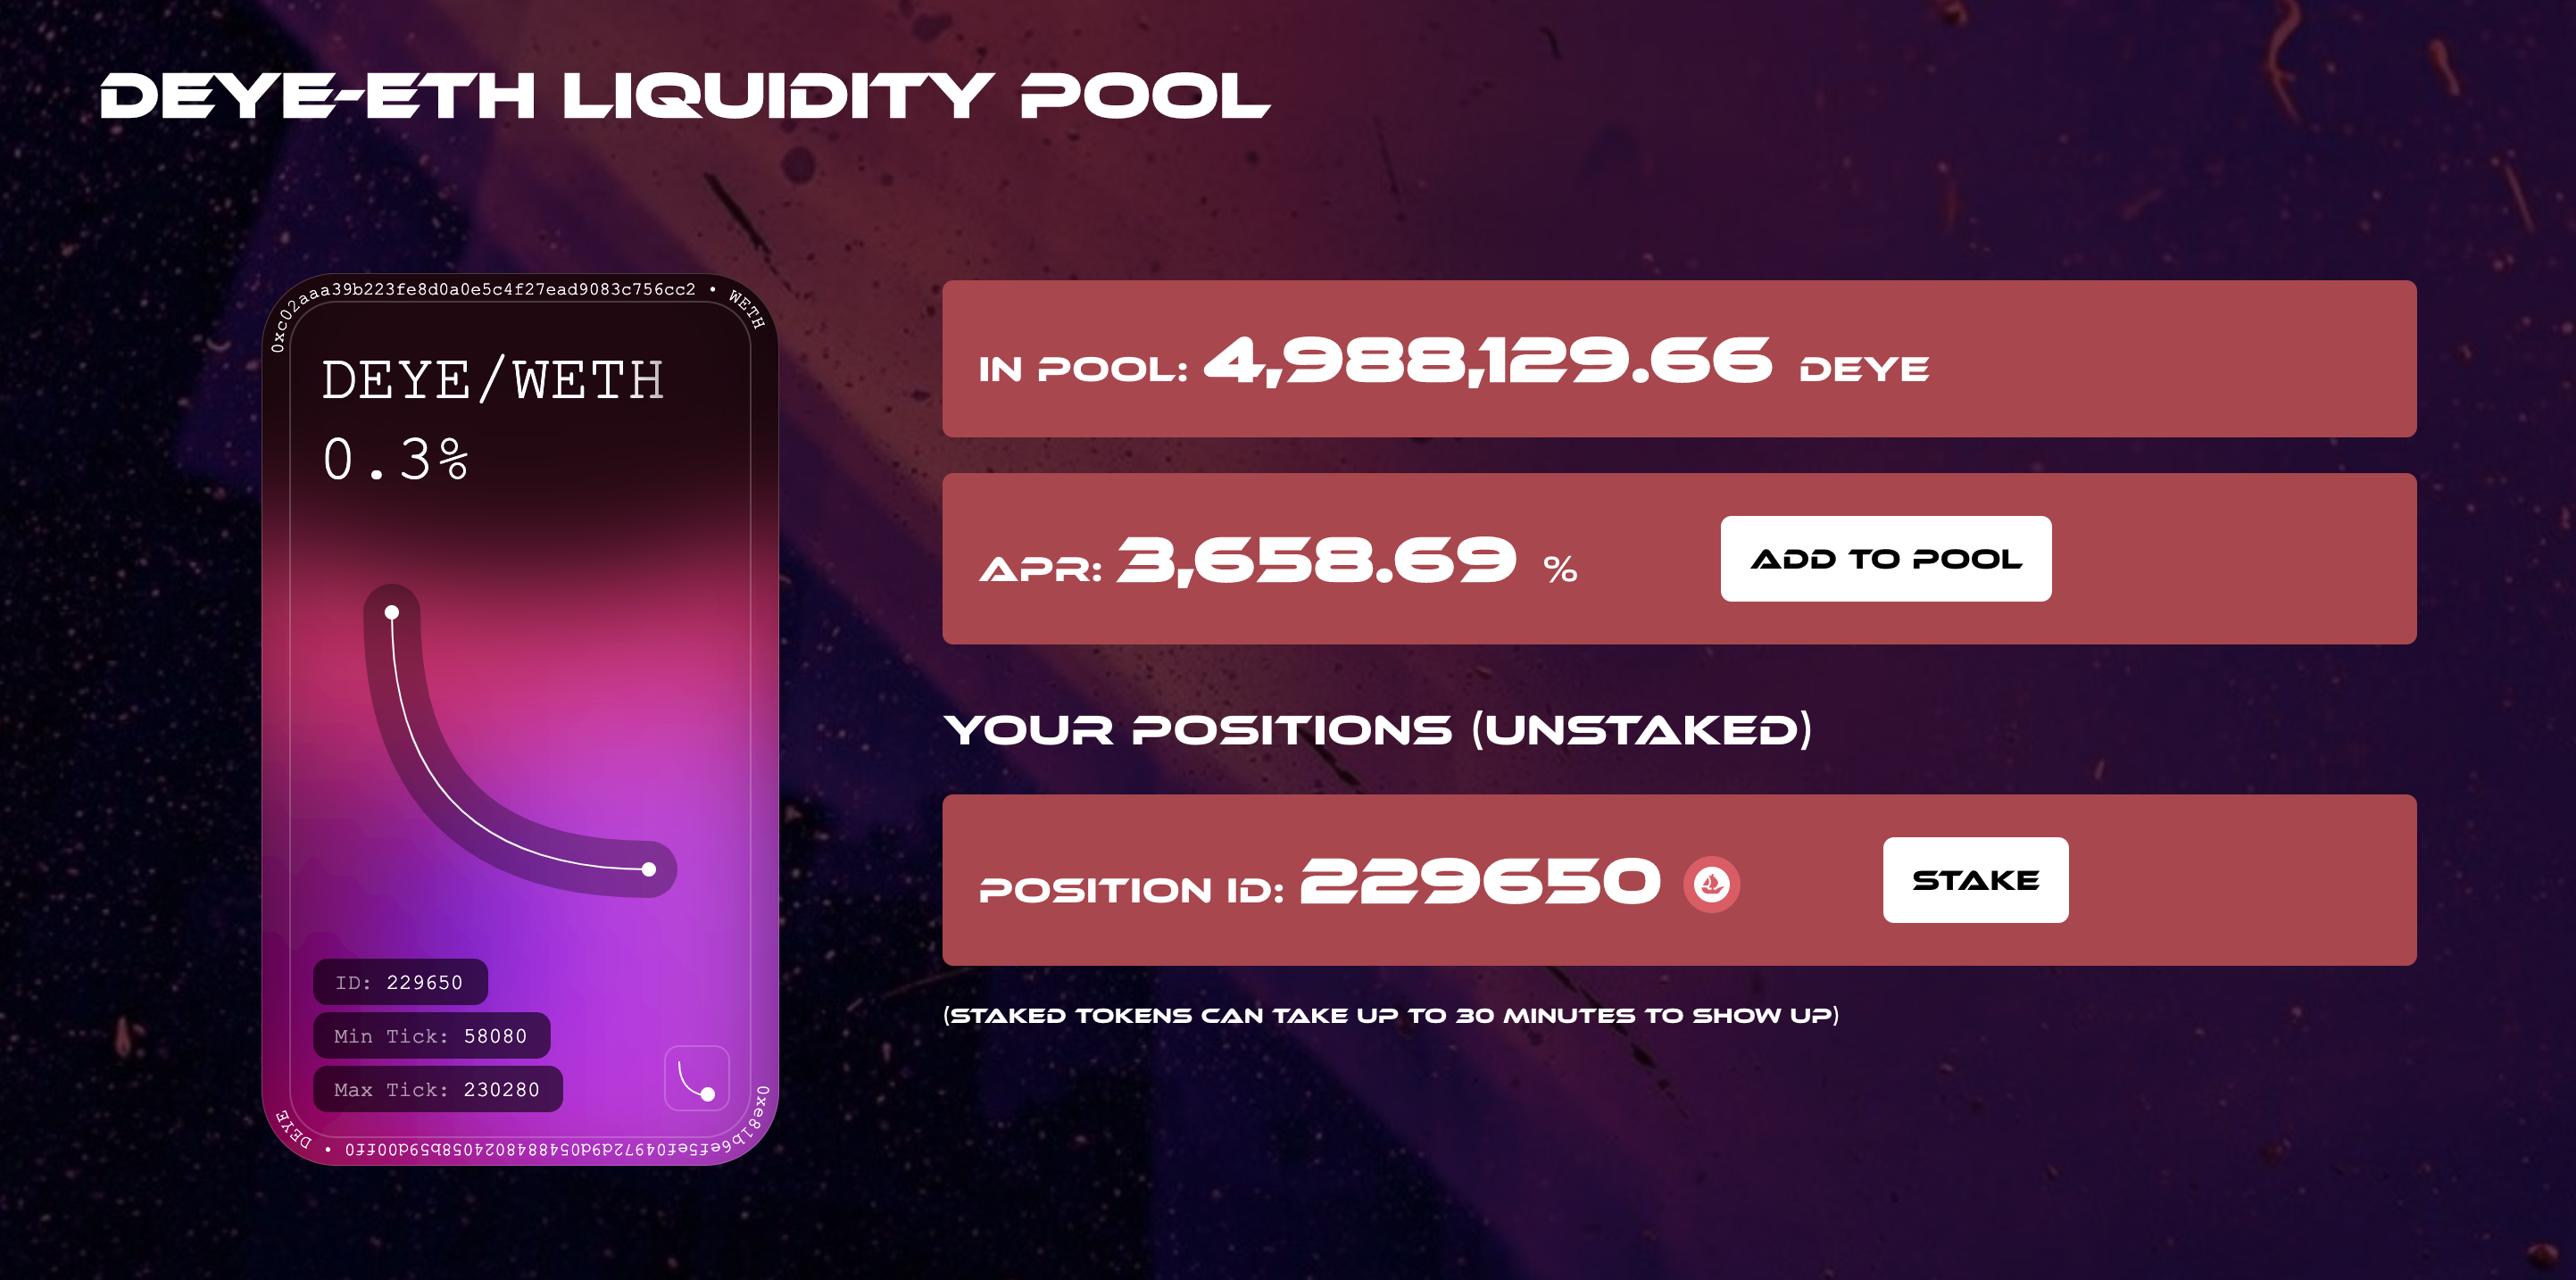 Use "STAKE" to stake your liquidity token